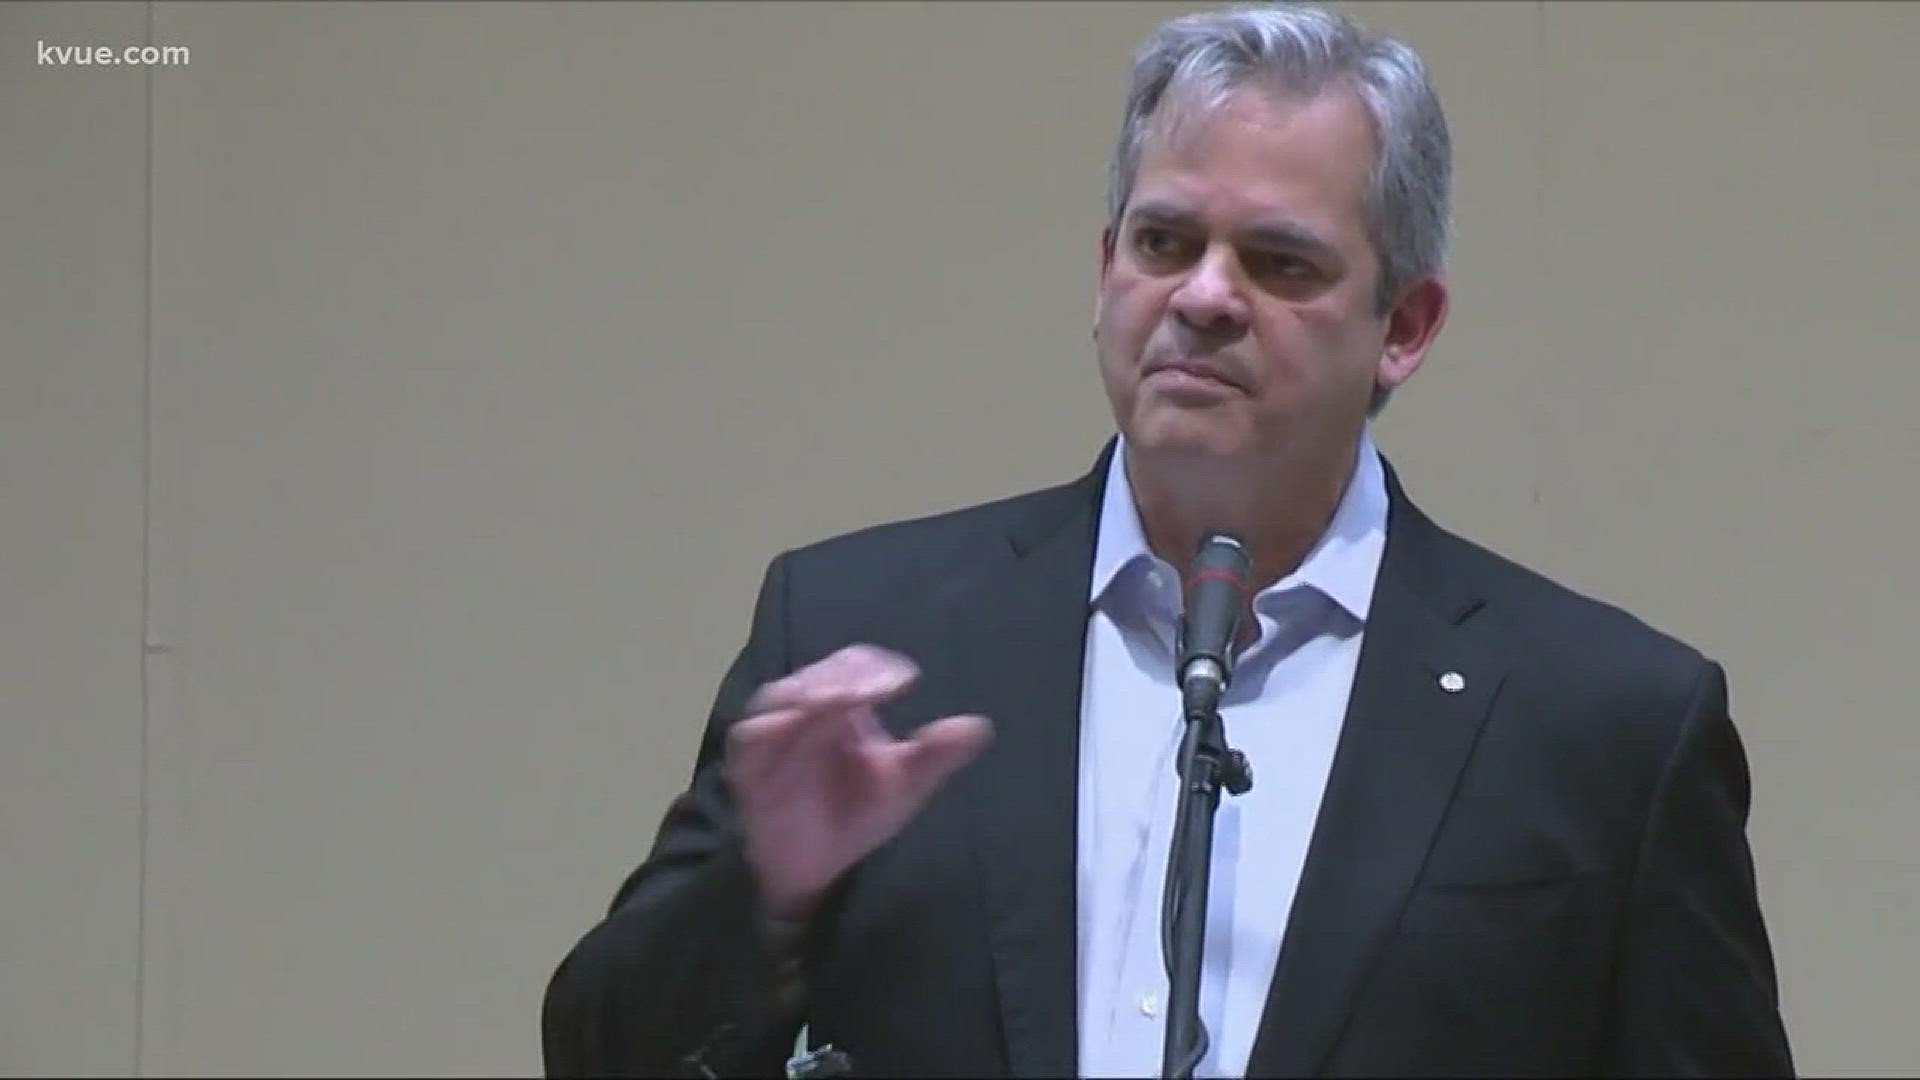 You're getting a look at Austin Mayor Steve Adler kicking off his campaign for re-election.